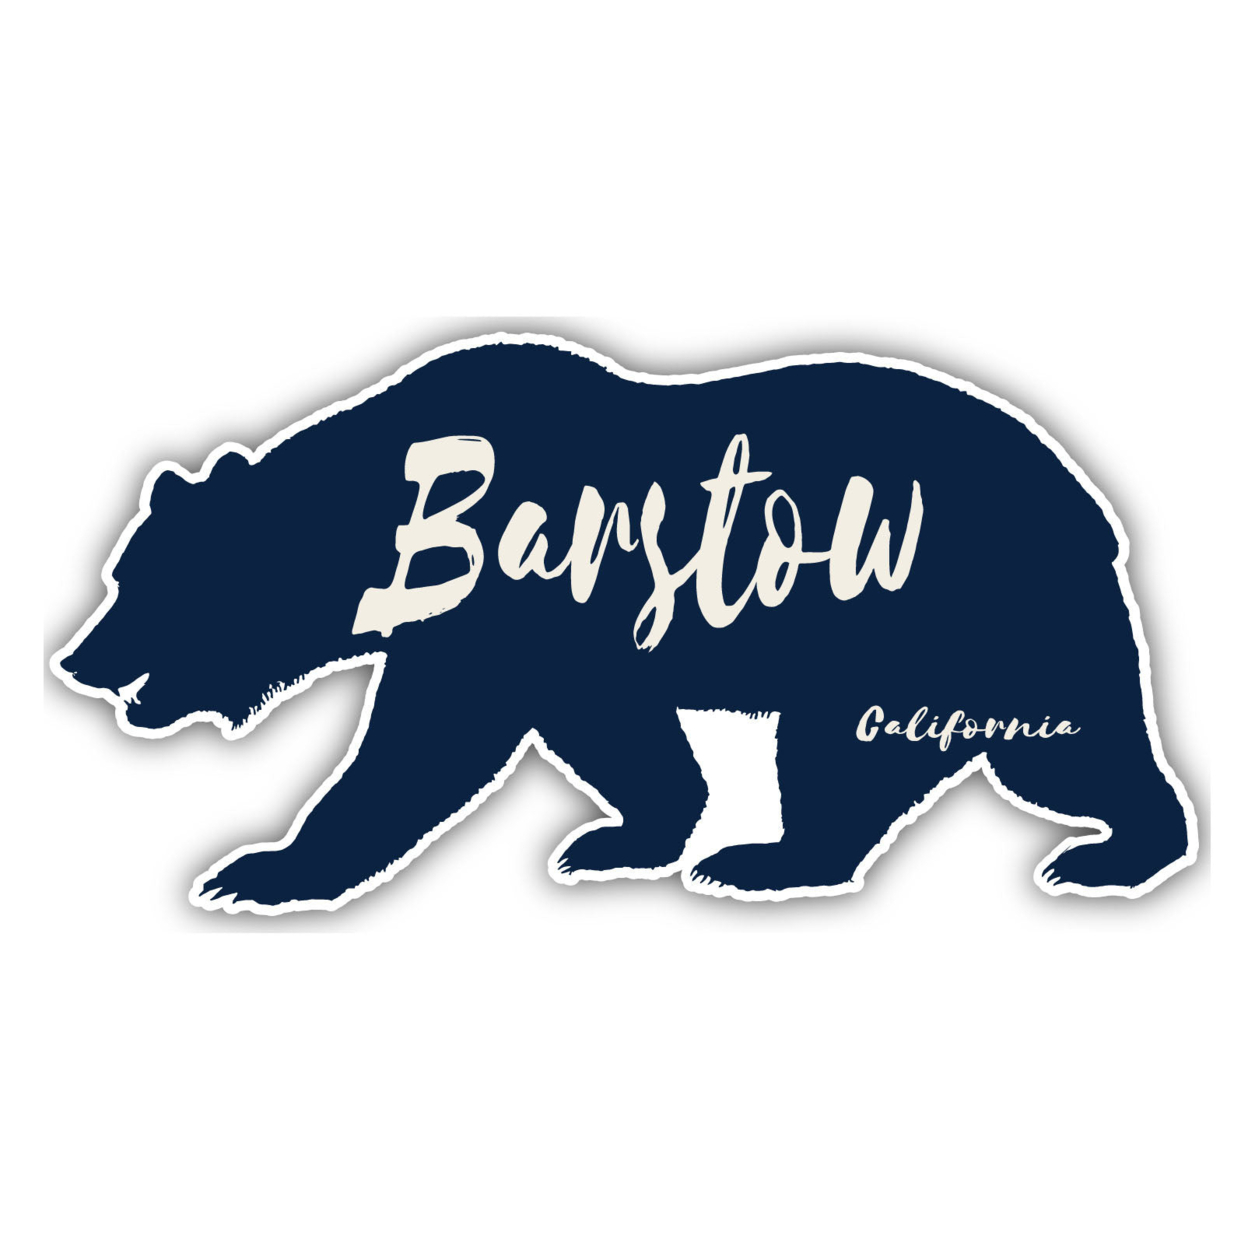 Barstow California Souvenir Decorative Stickers (Choose Theme And Size) - Single Unit, 6-Inch, Bear